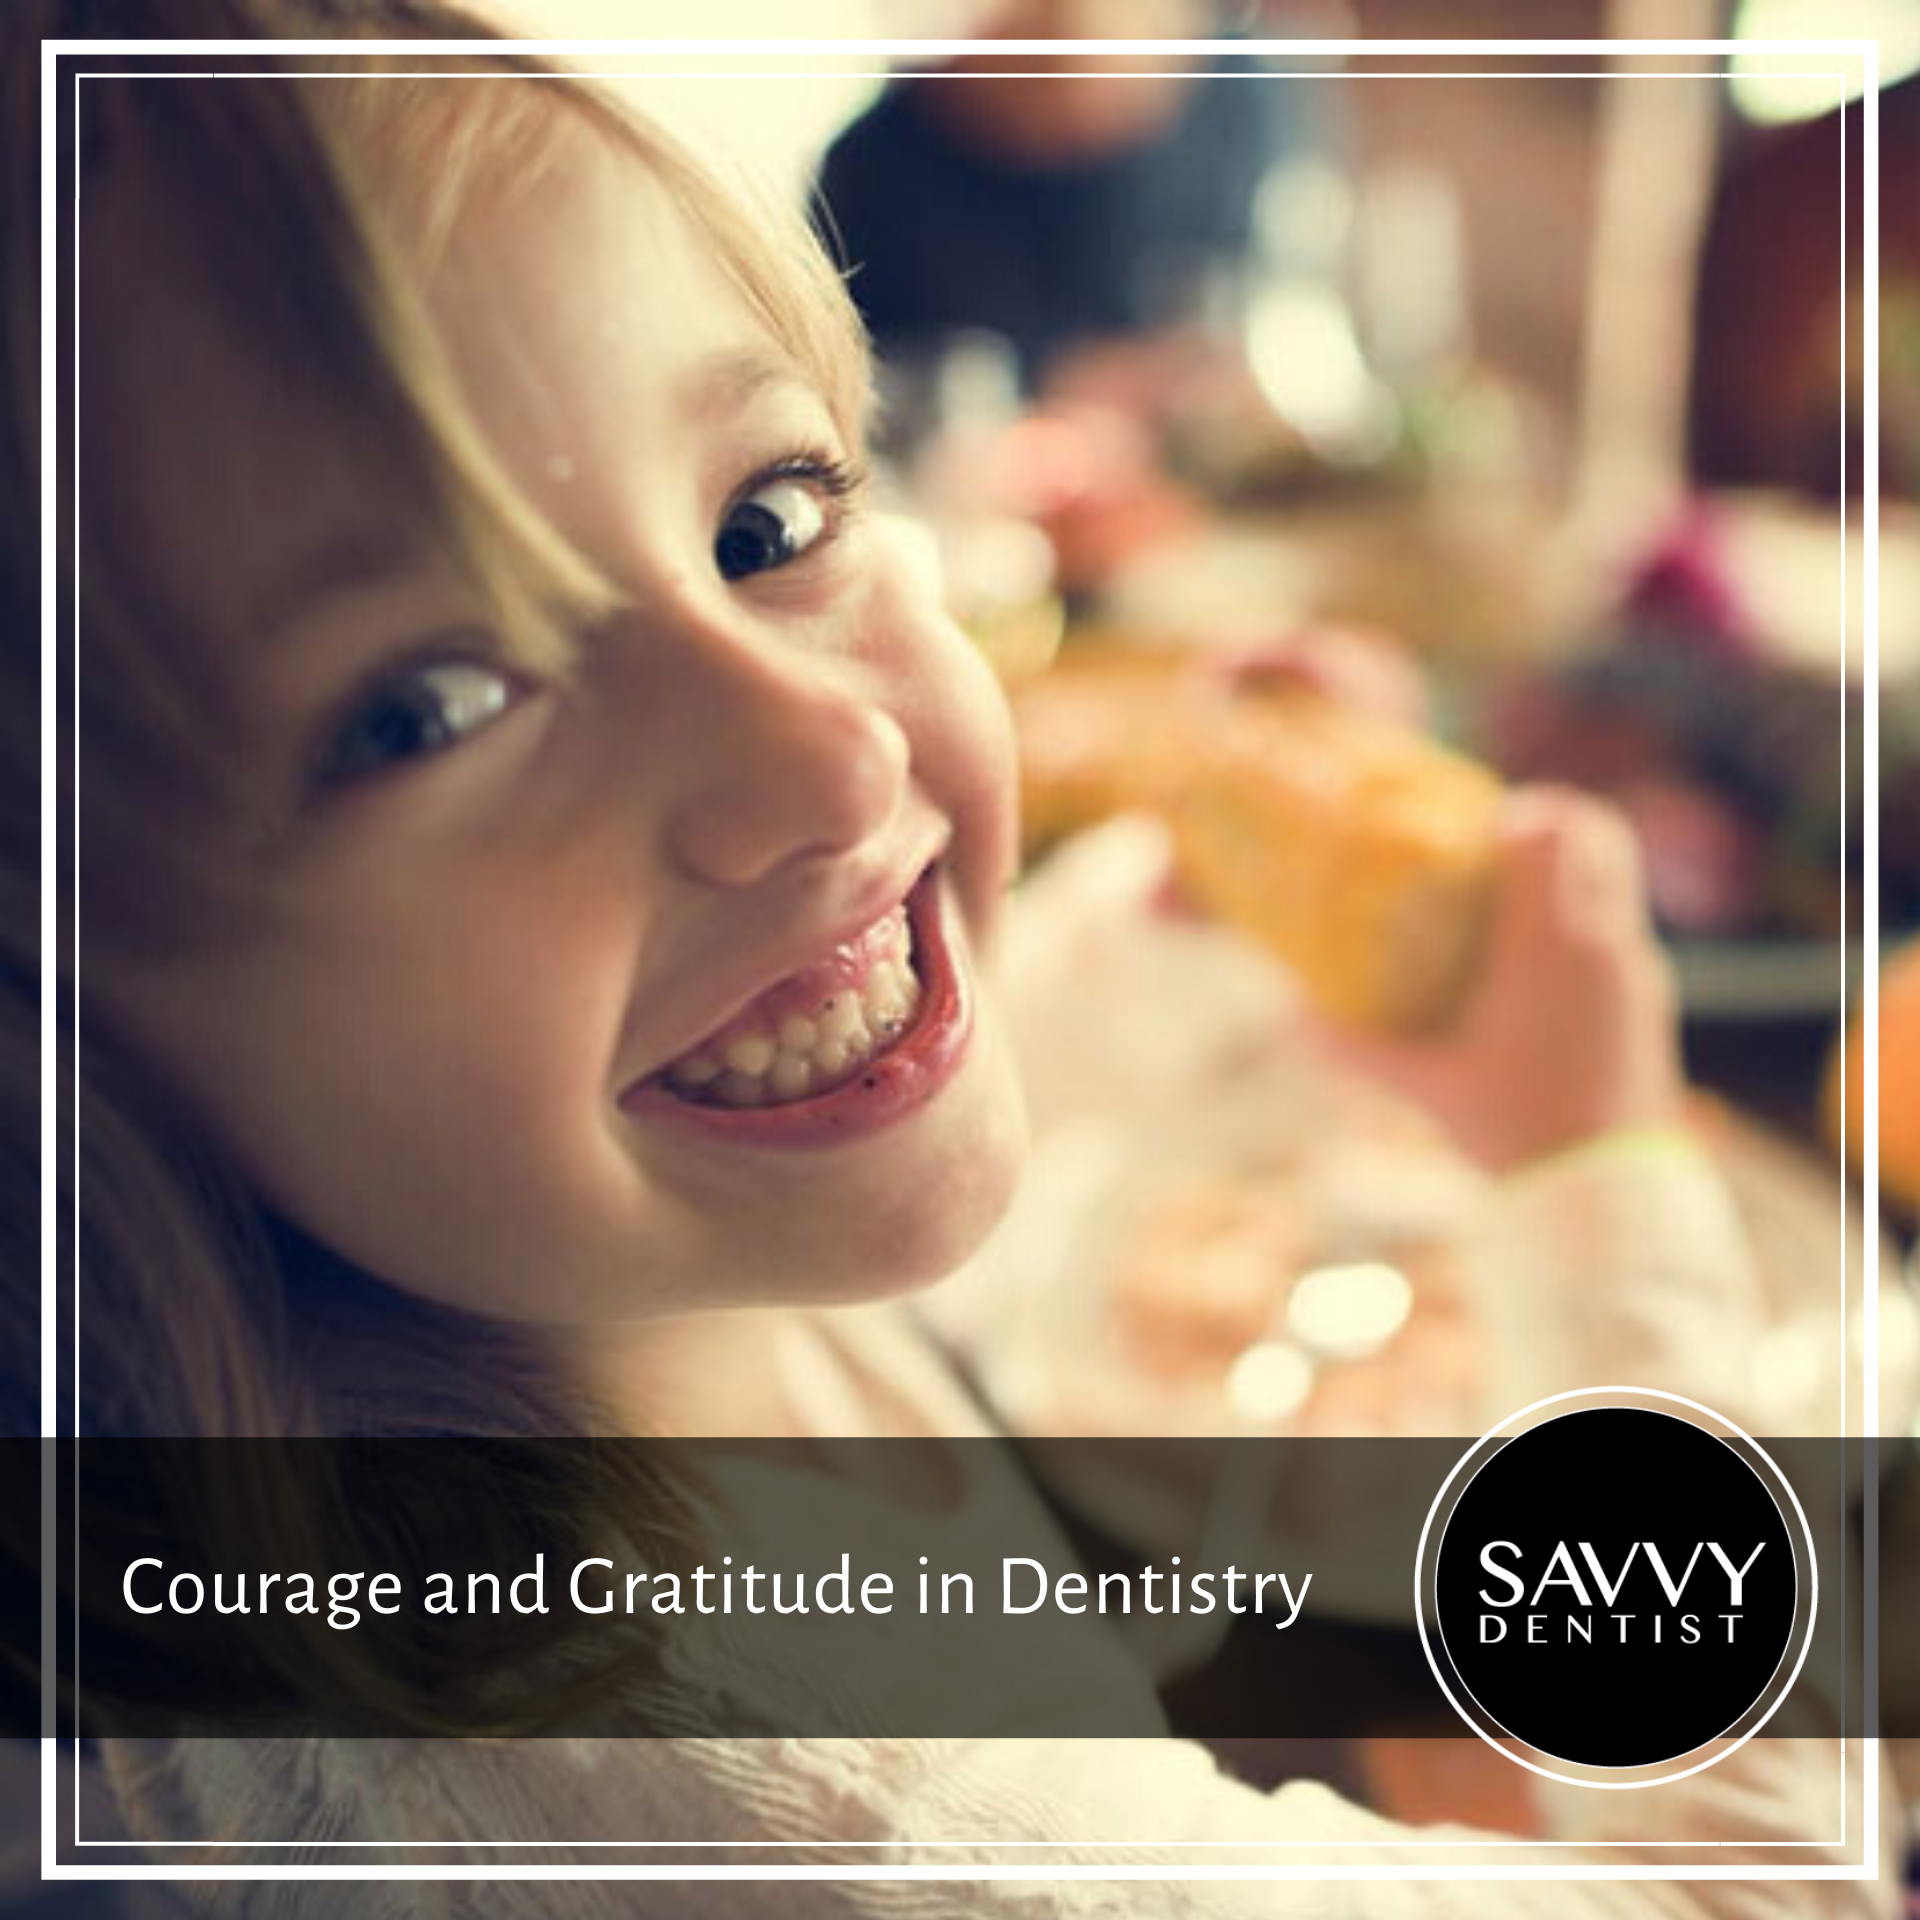 Courage and Gratitude in Dentistry